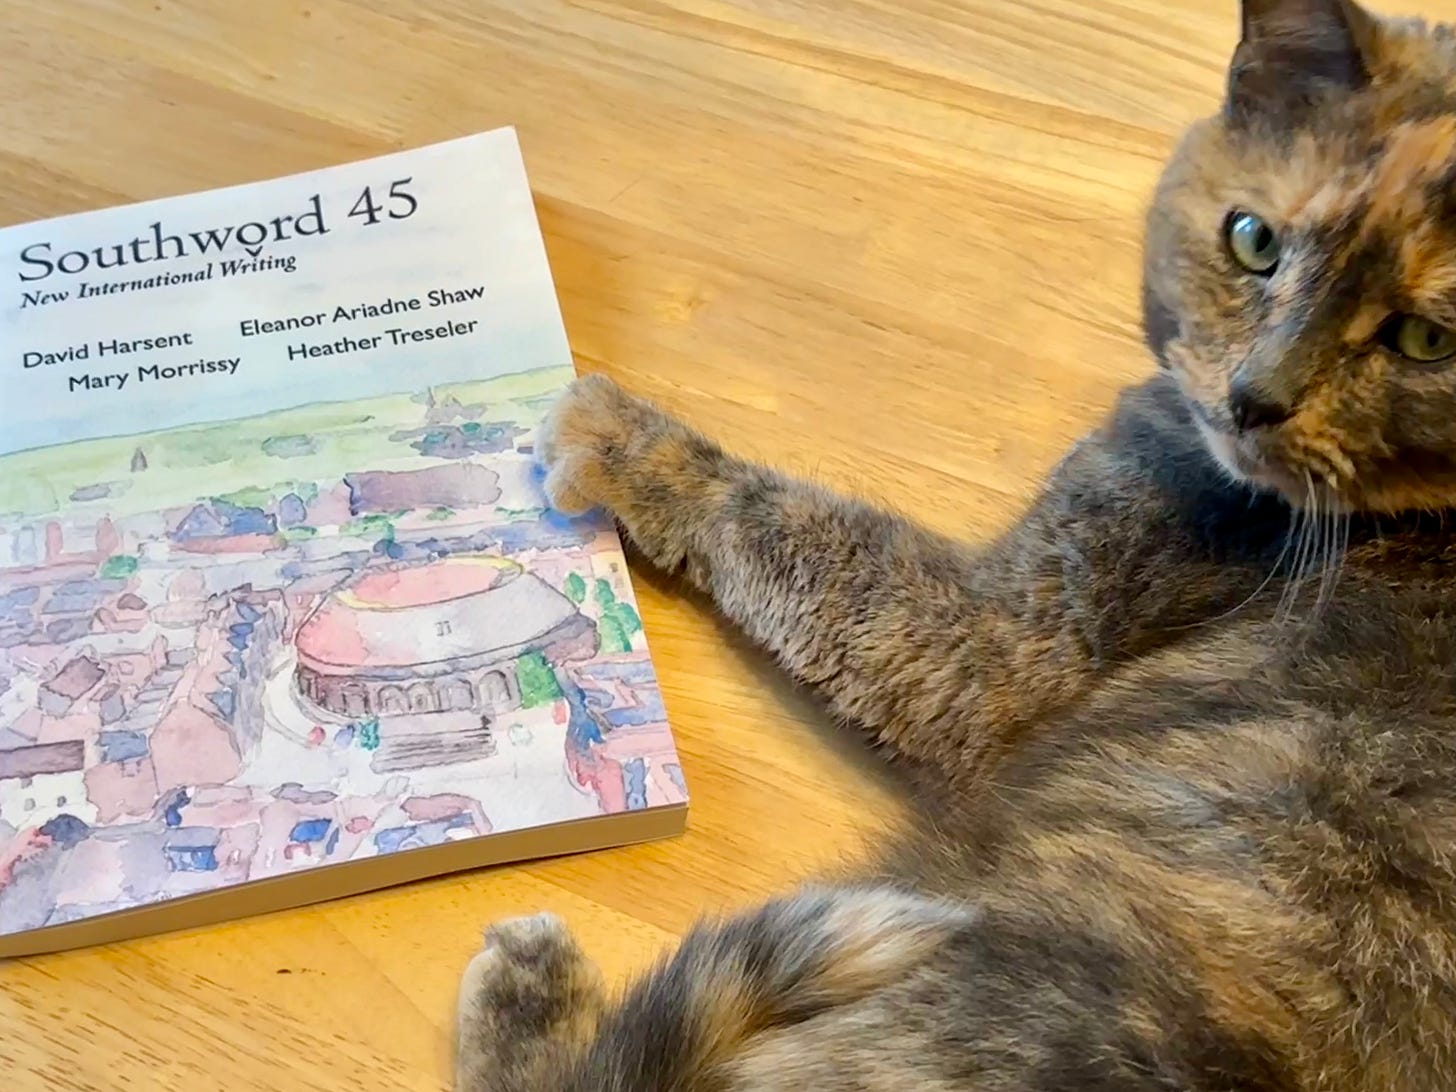 Left: The pastel cover of Southword 45. Right: A dilute tortoiseshell cat lounging beside the magazine, gripping it with one paw, and looking over her shoulder at the camera as if to say, “This copy is mine. Get your own.”